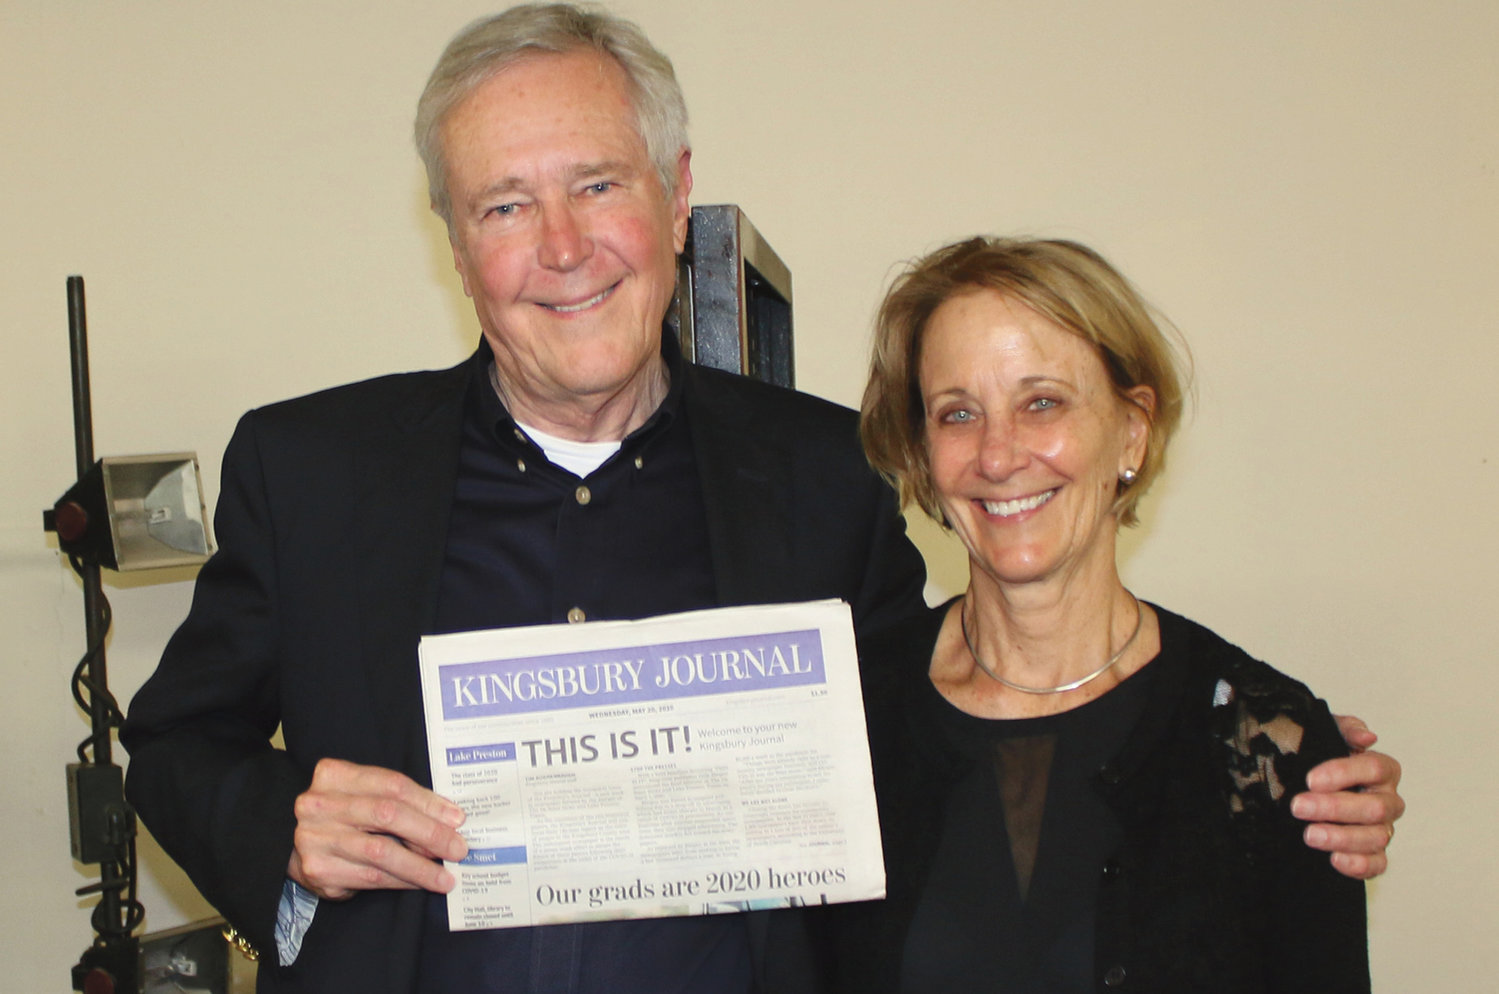 James and Deborah Fallows, co-authors of “Our Towns” book, were recently in De Smet visiting the Kingsbury Journal and holding discussions with staff and volunteers about the strategies that kept a newspaper in print in our county. James is seen here holding the first edition of the Kingsbury Journal, dated May 20, 2020.